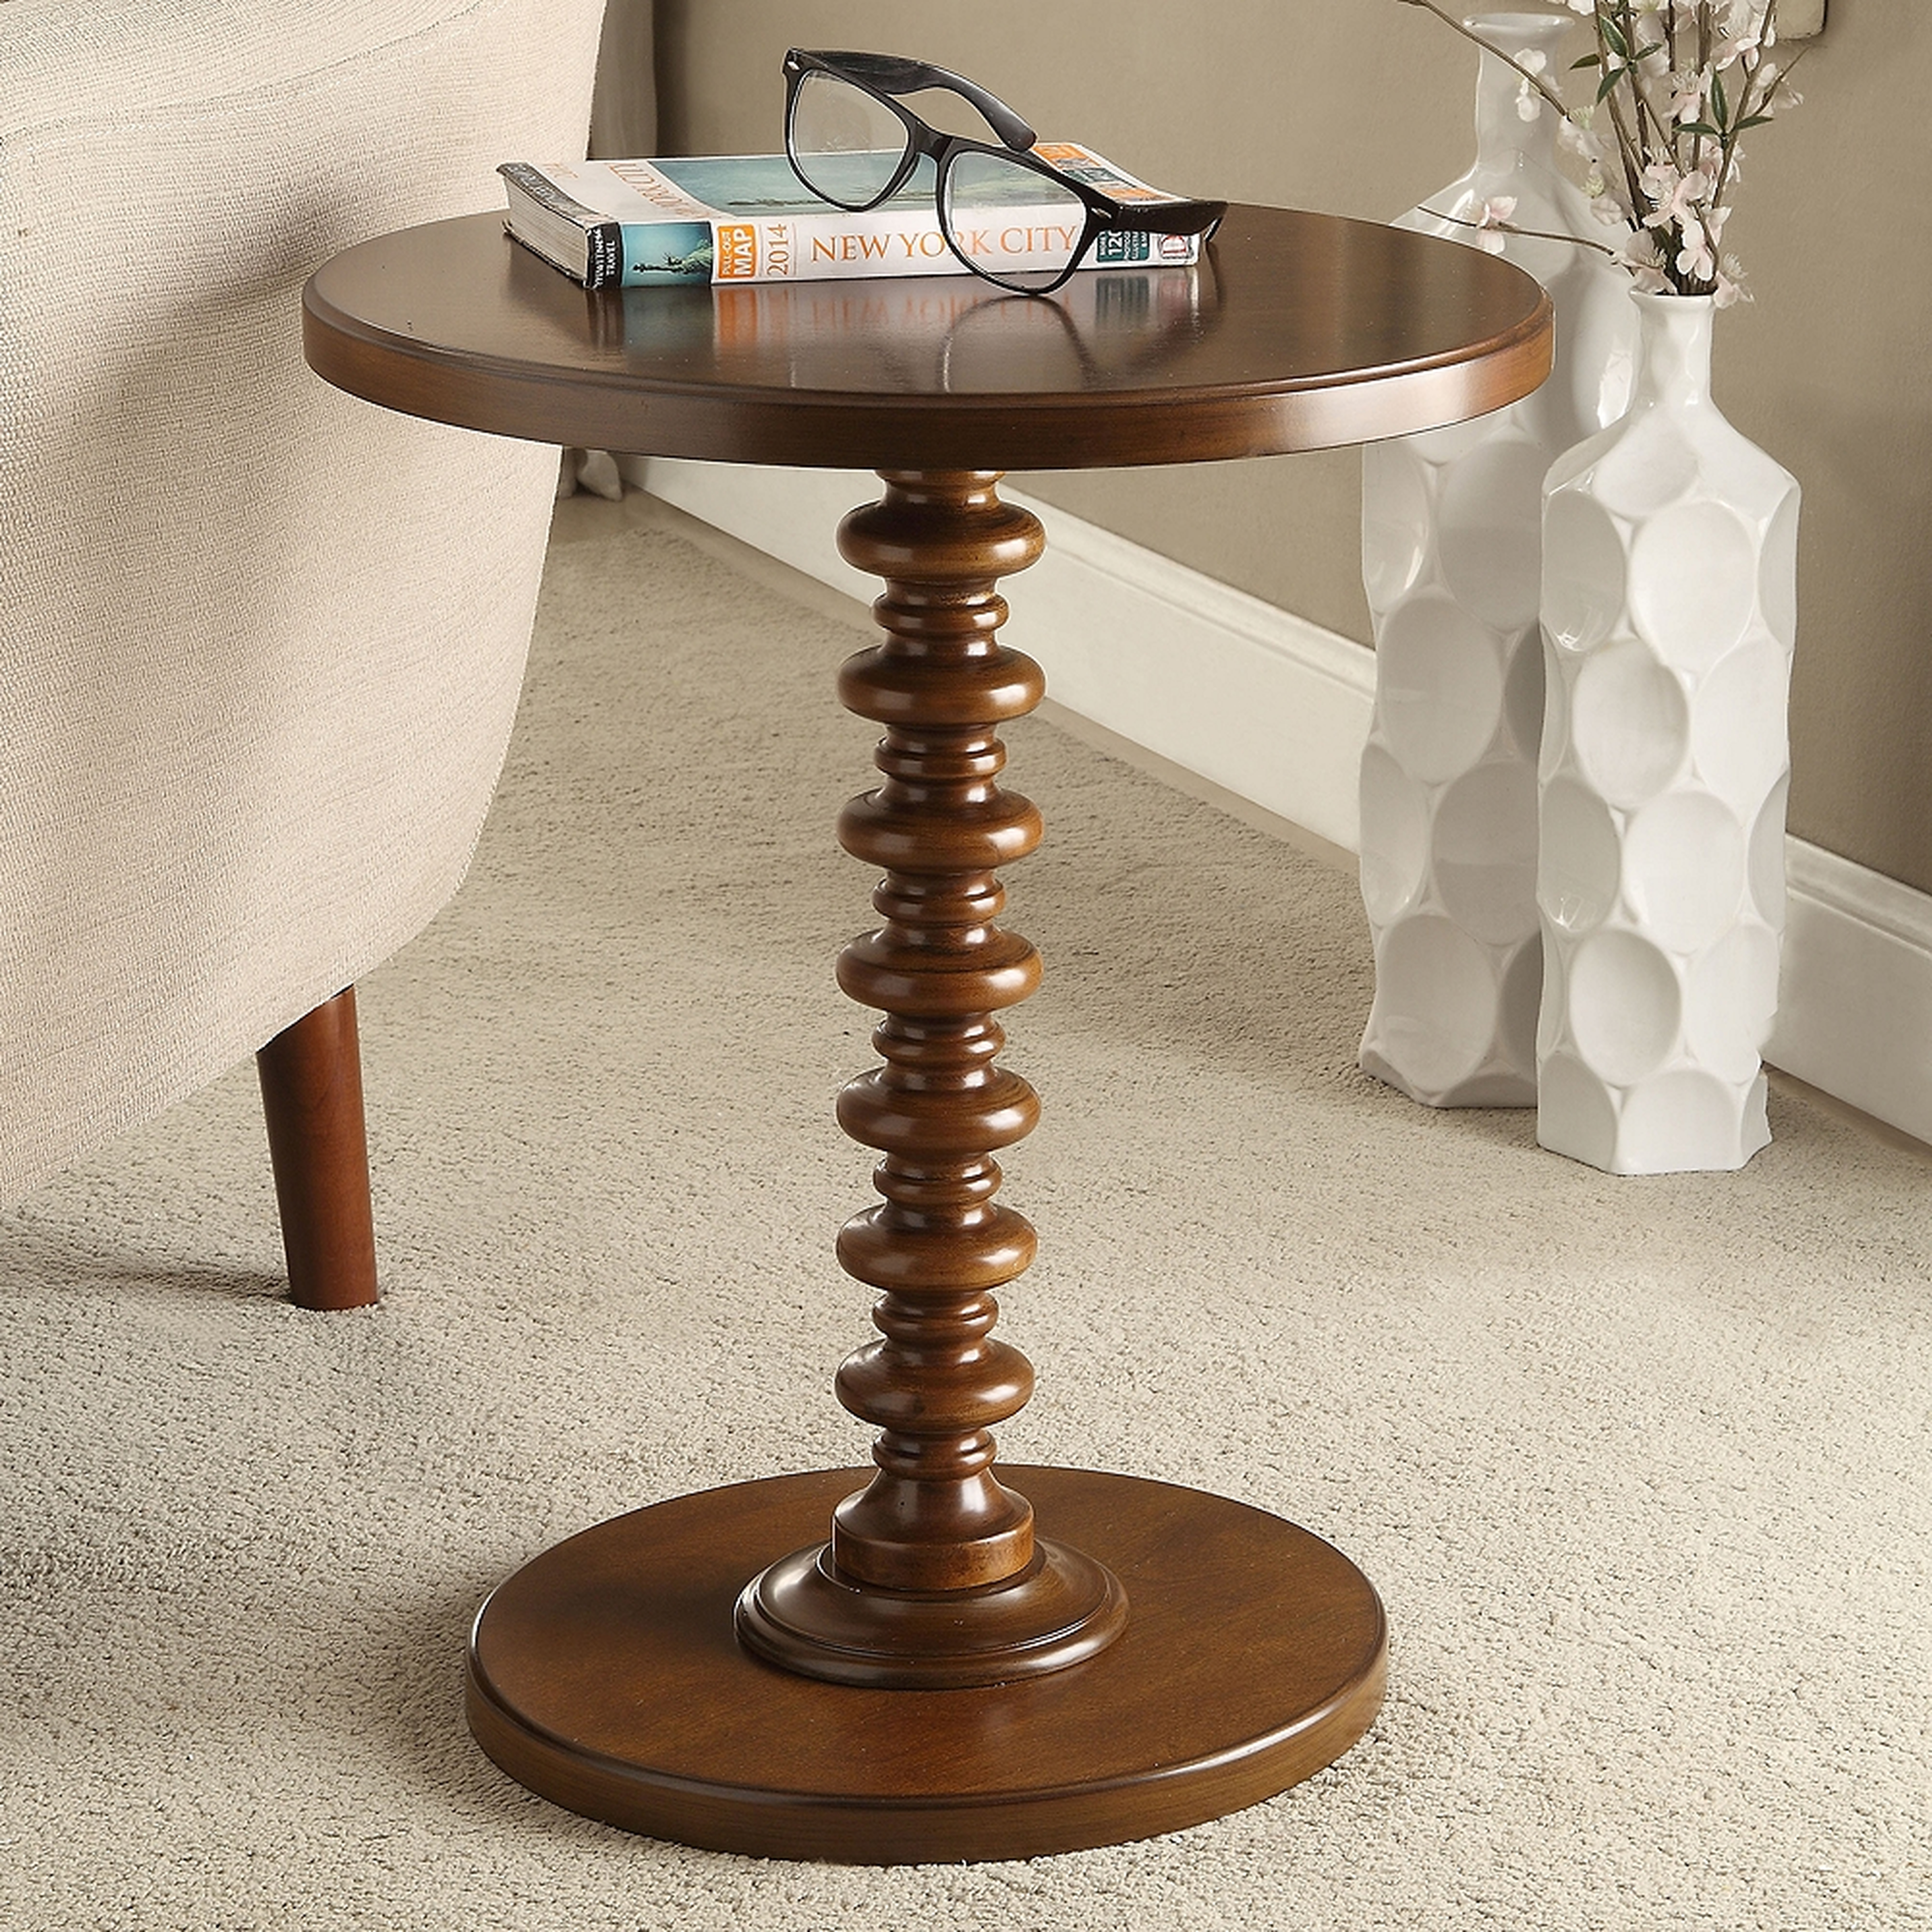 Acton 17" Wide Walnut Round Pedestal Wood Side Table - Style # 73C97 - Lamps Plus